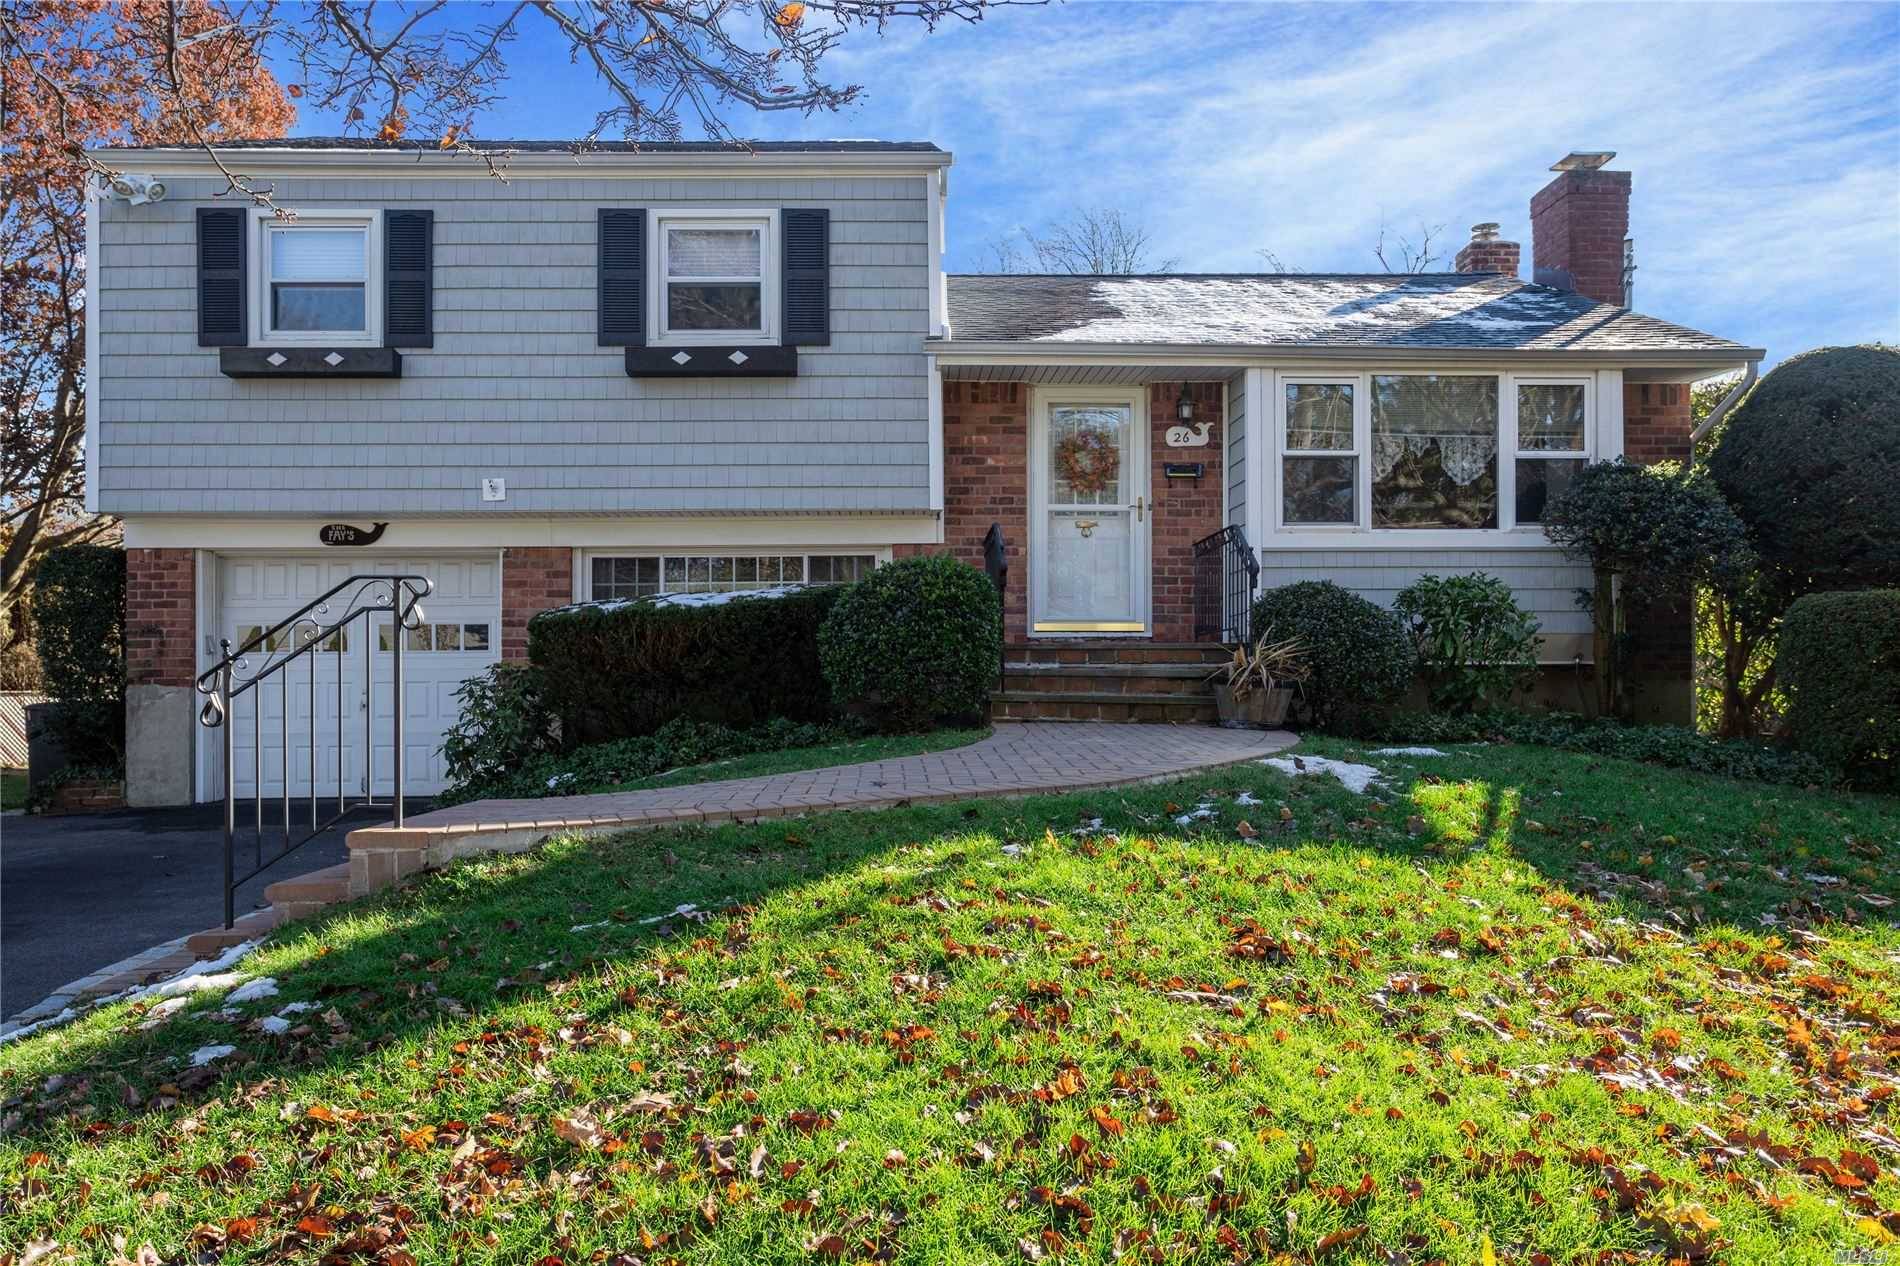 Location, Location this Lovely Home is a Stones Throw From Greenlawn Village and Lies in the Sought After, Award winning Elwood School ; District.